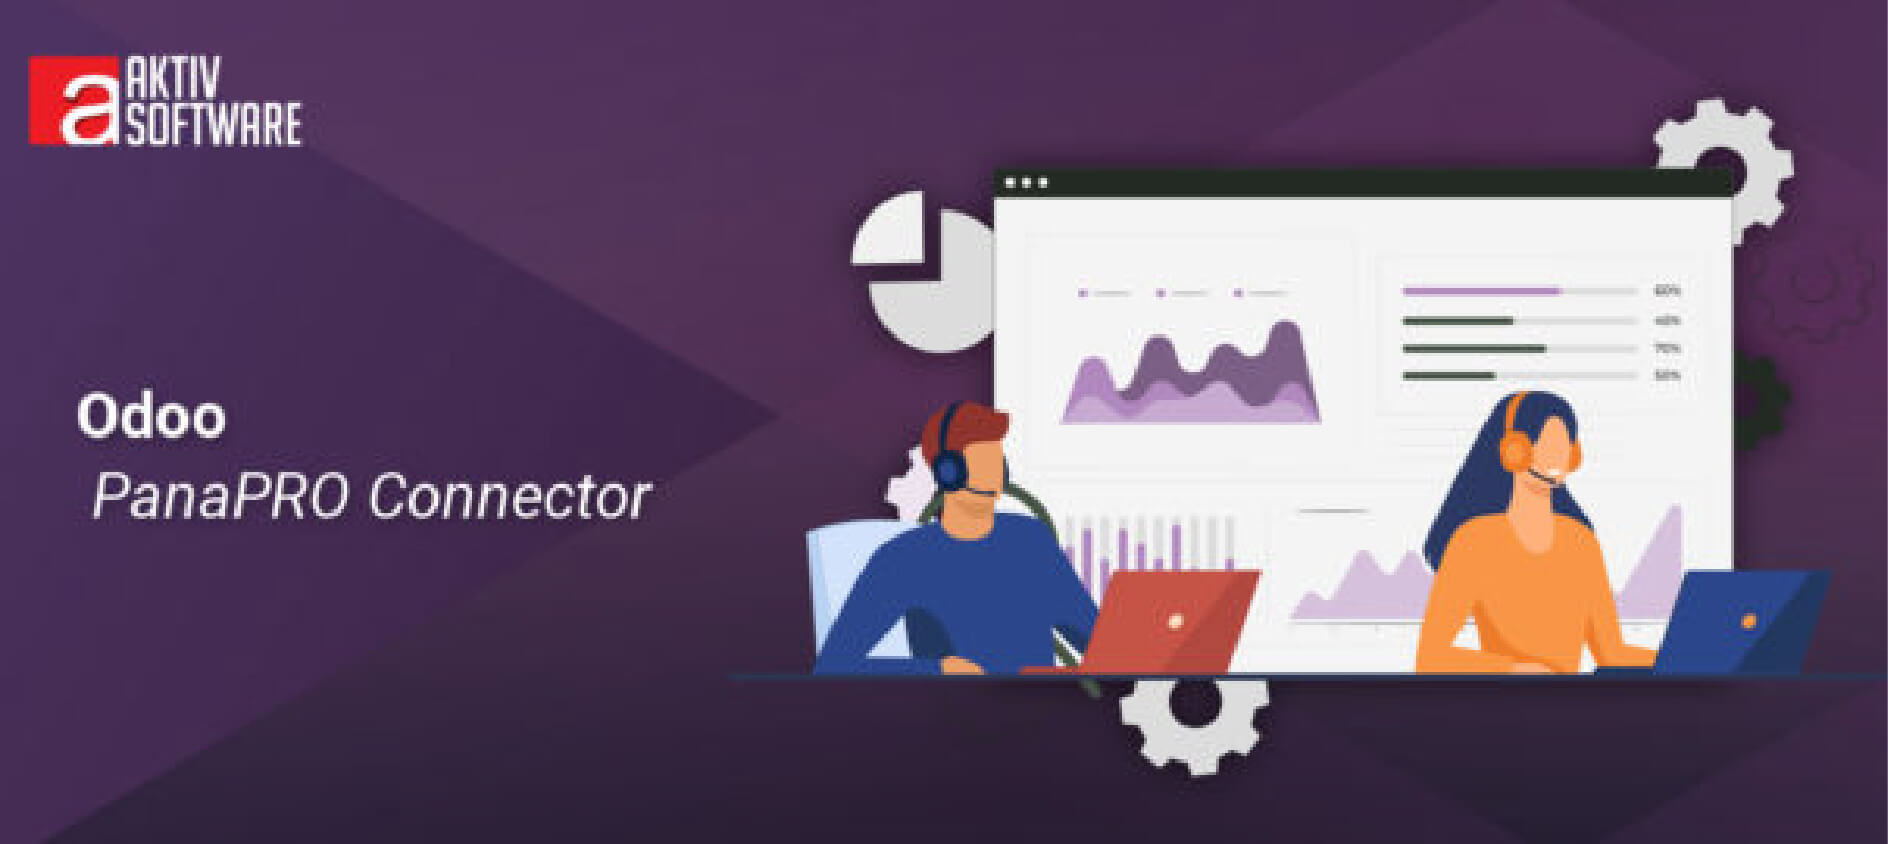 odoo-connector-for-PanaPRO-call-center-system